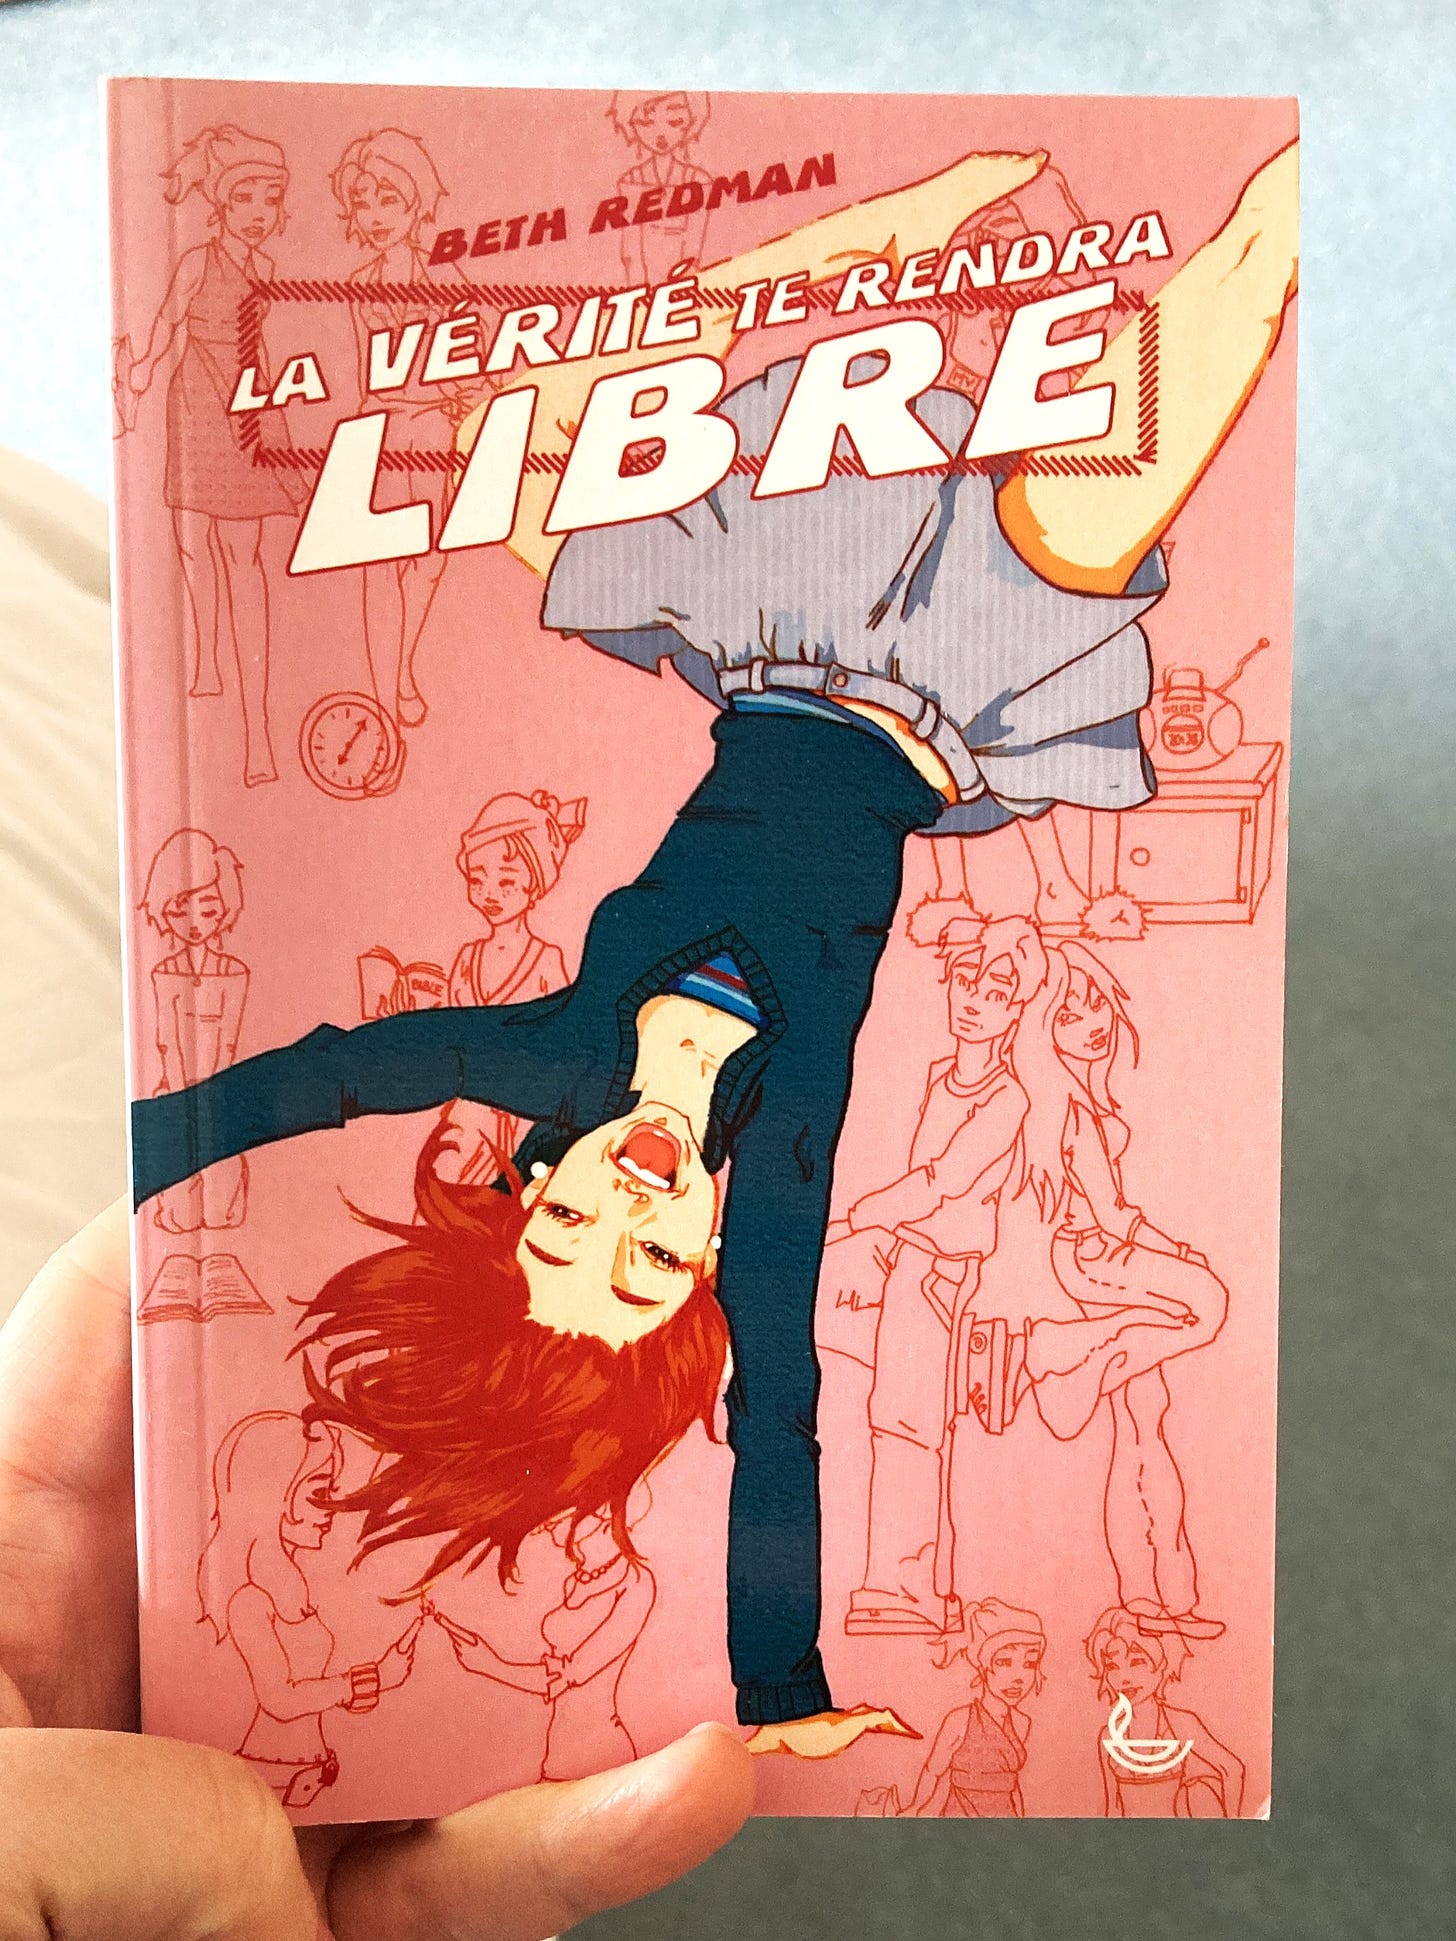 The book cover is pink. Across the front is a illustrated white girl wearing a blue jumper and skirt (somehow defying gravity as she is upside down).